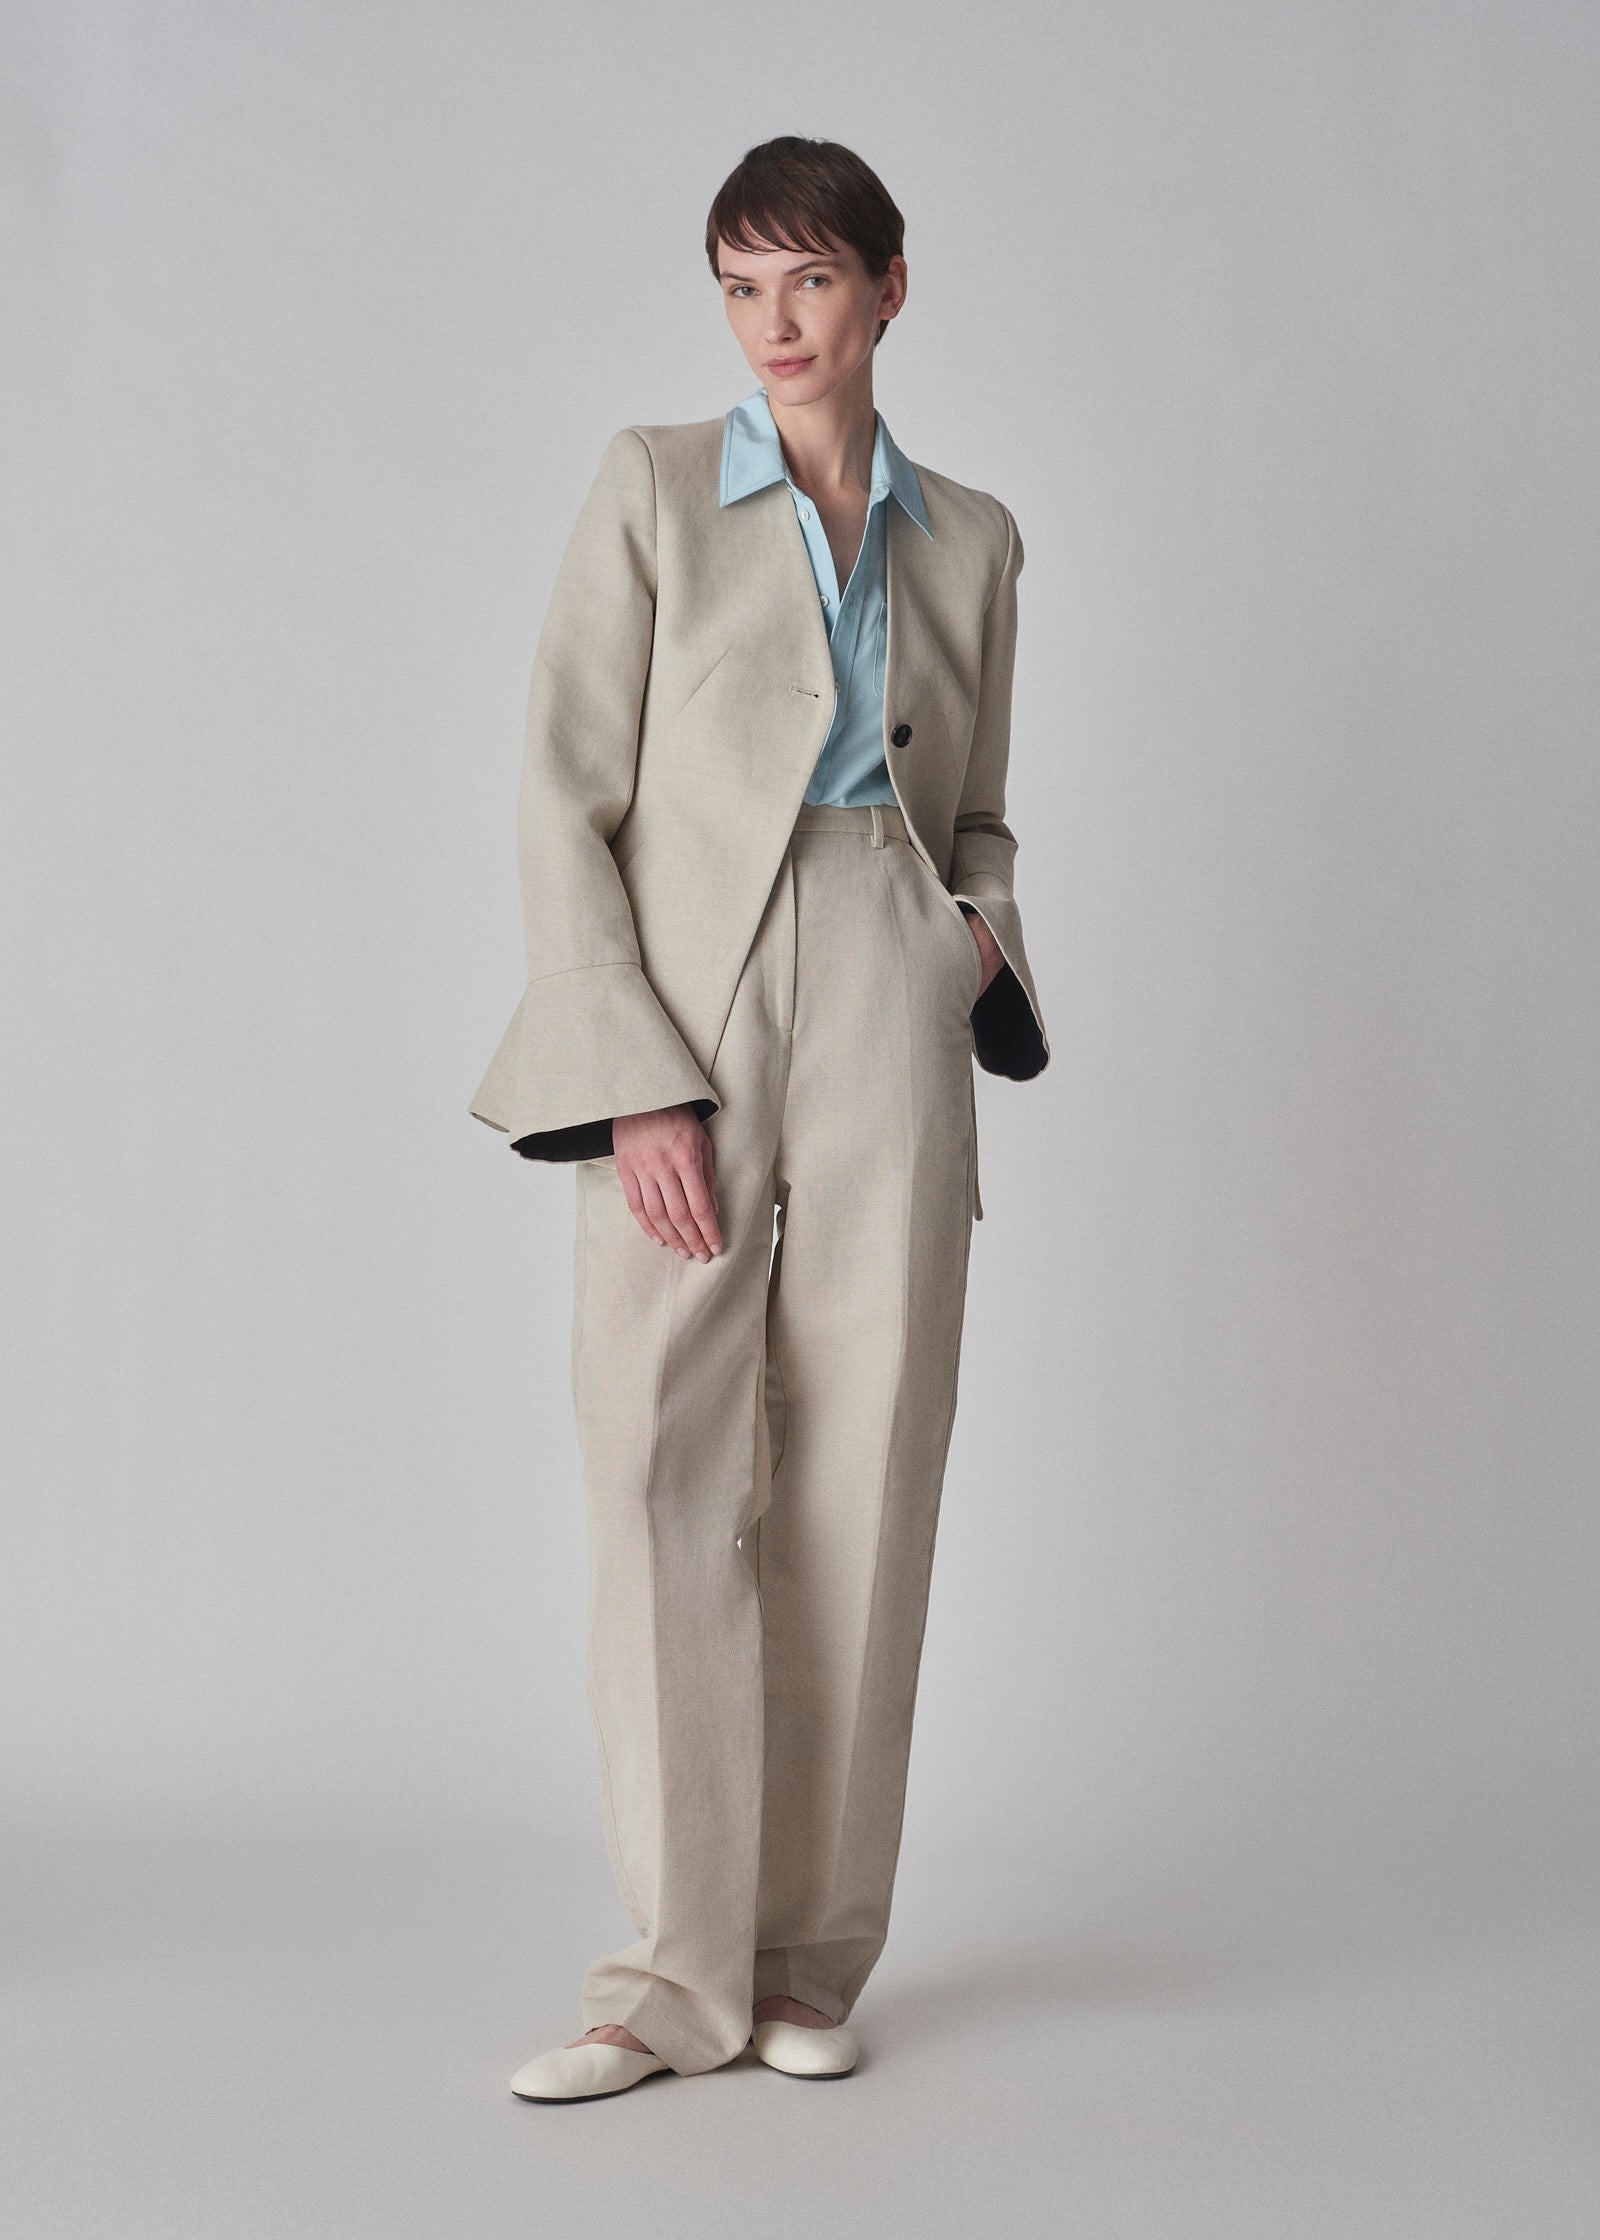 Peplum Cuff Jacket in Linen - Clay - CO Collections